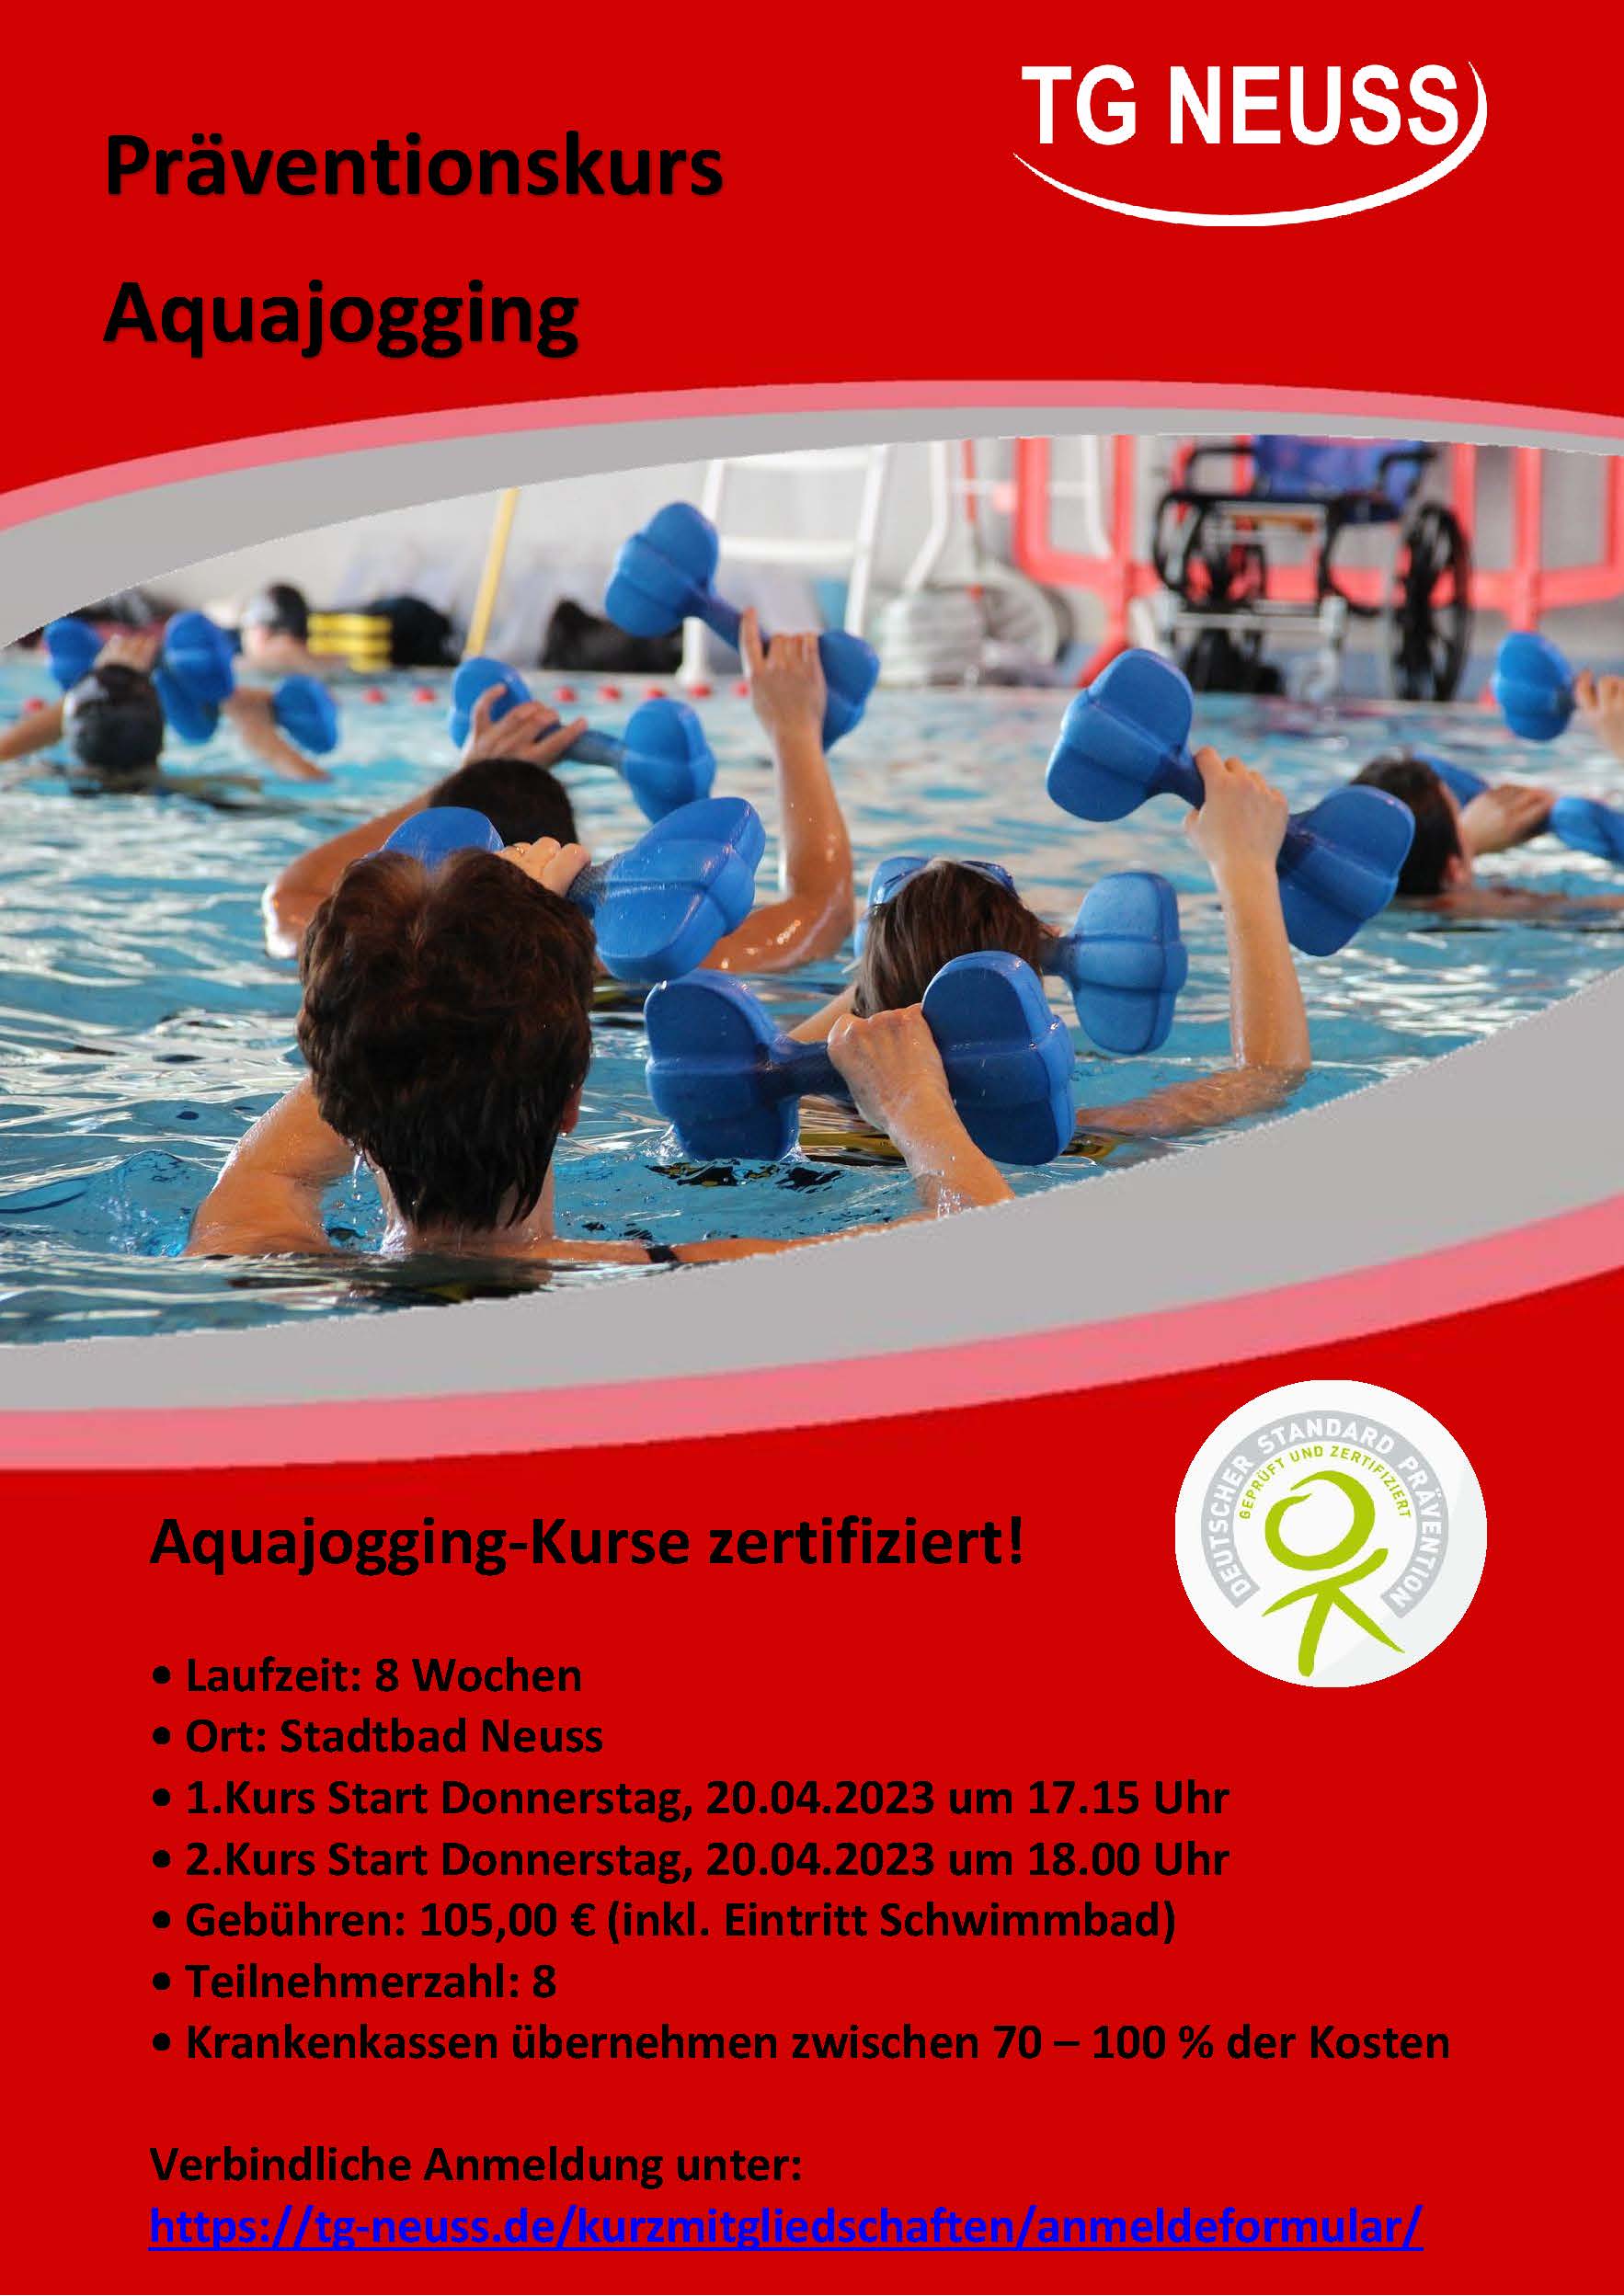 You are currently viewing 2x Präventionskurse Aquajogging